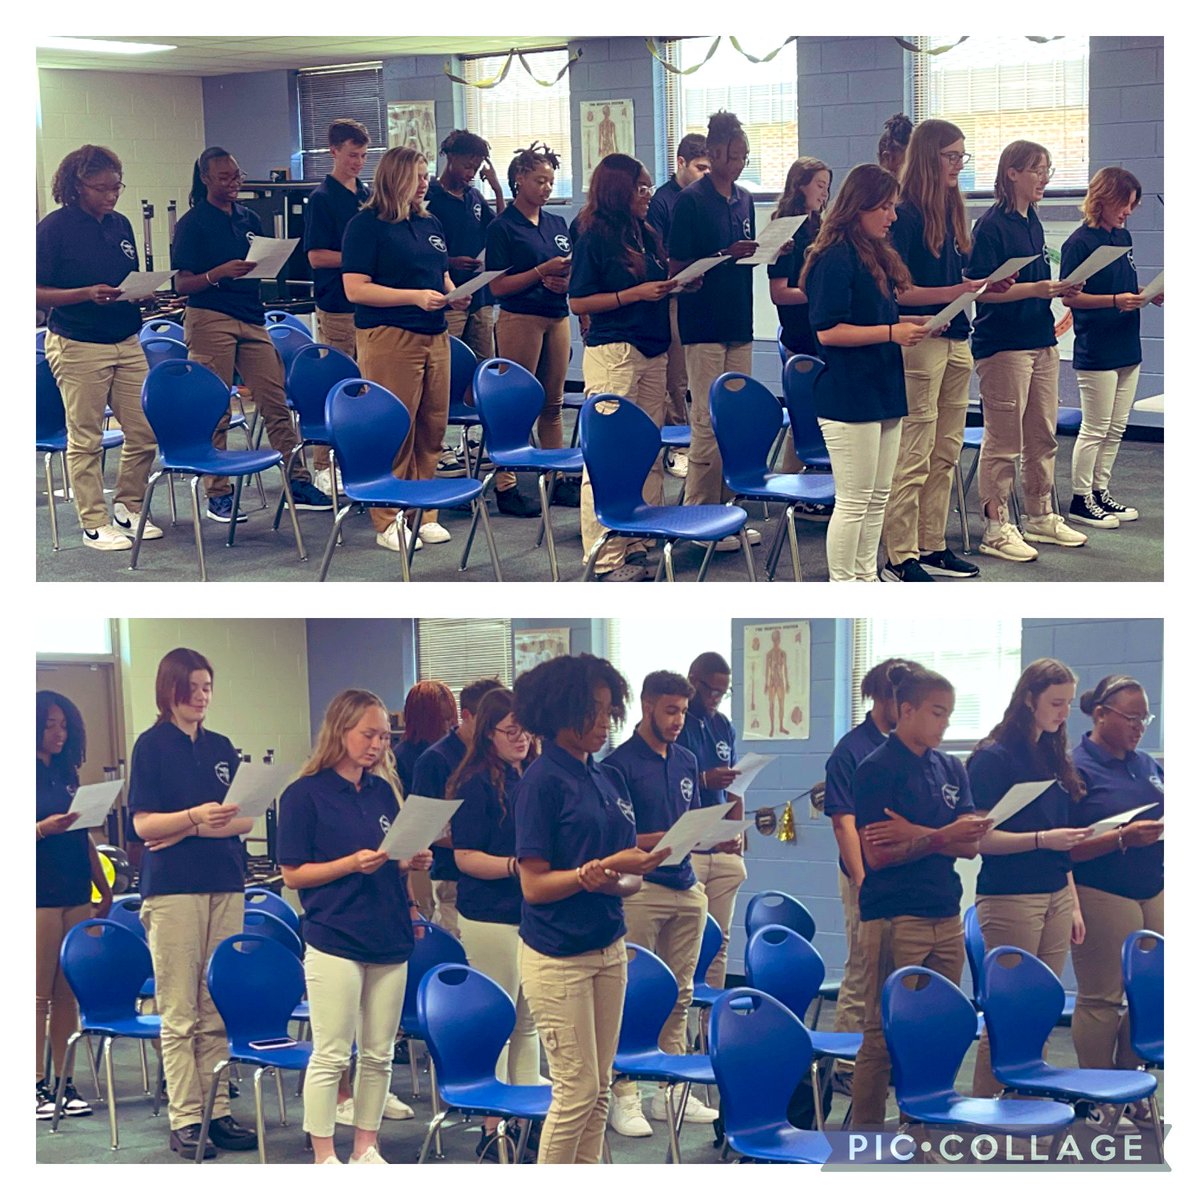 Congratulations to the #PTOT students on #culminating the school year with a beautiful #pinning ceremony! The smiles on their parents' faces are priceless! . 🎓✨ #FutureTherapists #GettinItDone #SkillsMatter
#NHRECCTE #LeadBoldly 
@NHREC_VA